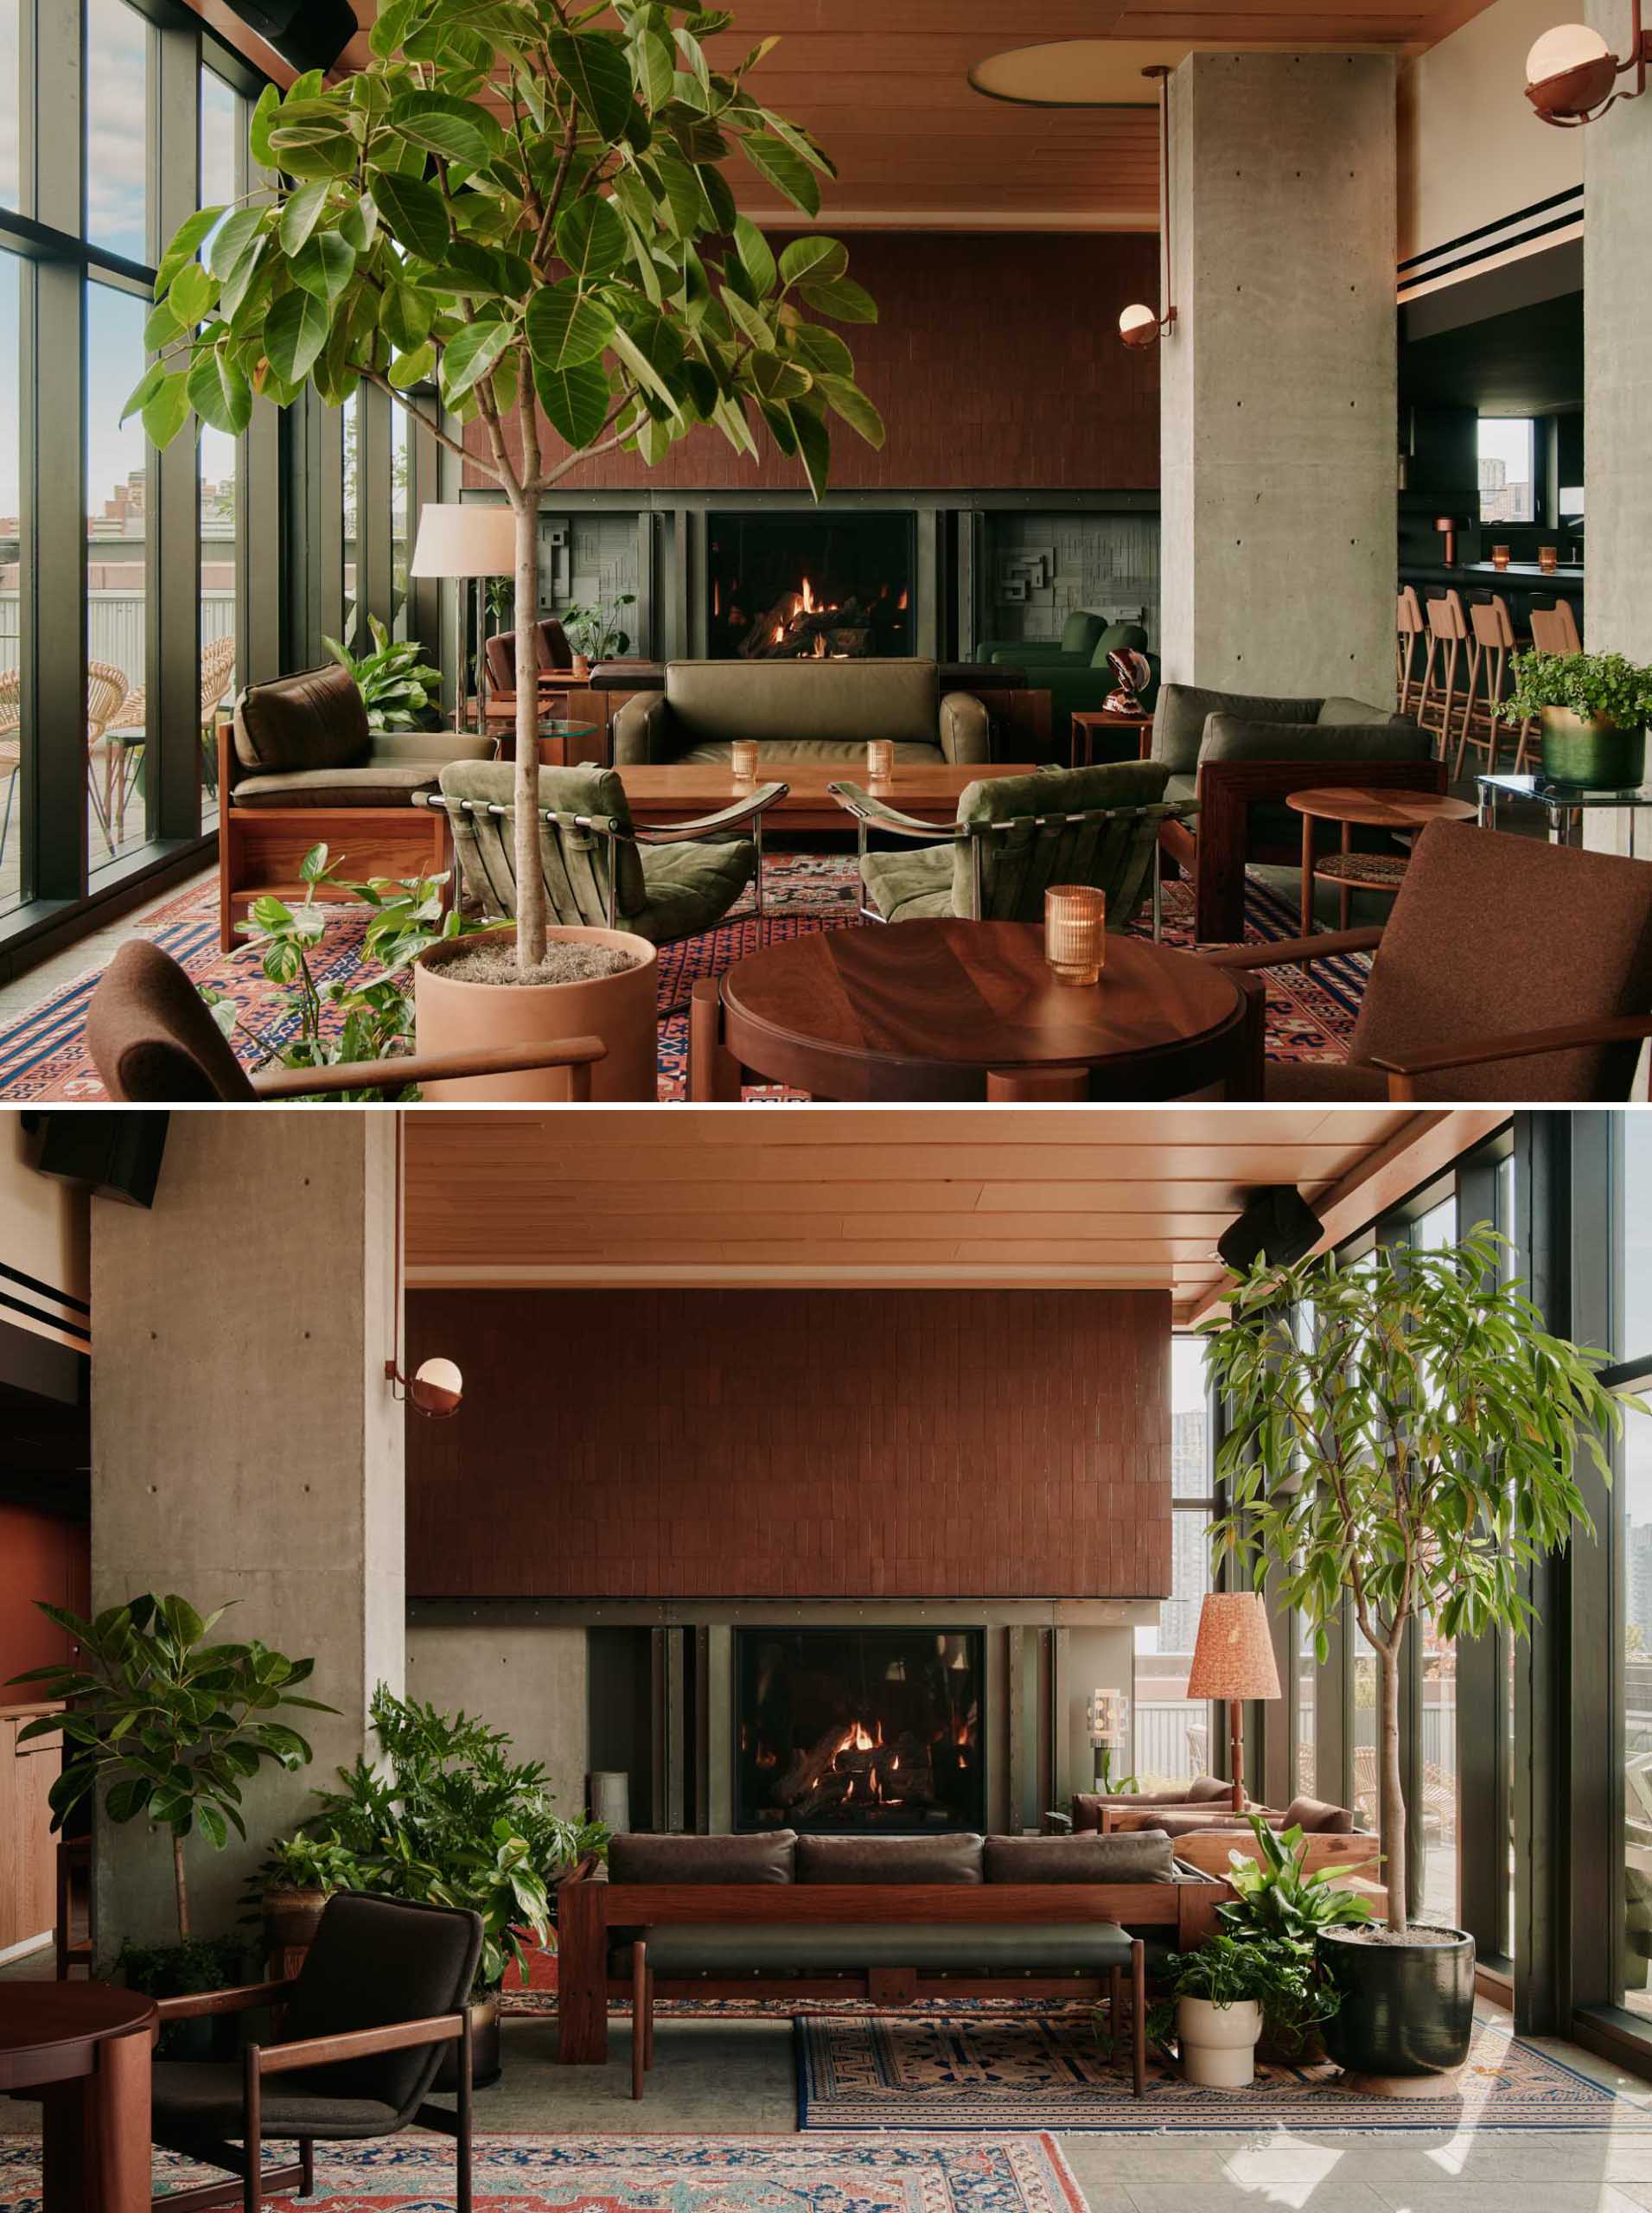 This modern hotel has a lounge with a fireplace and a variety of seating options.